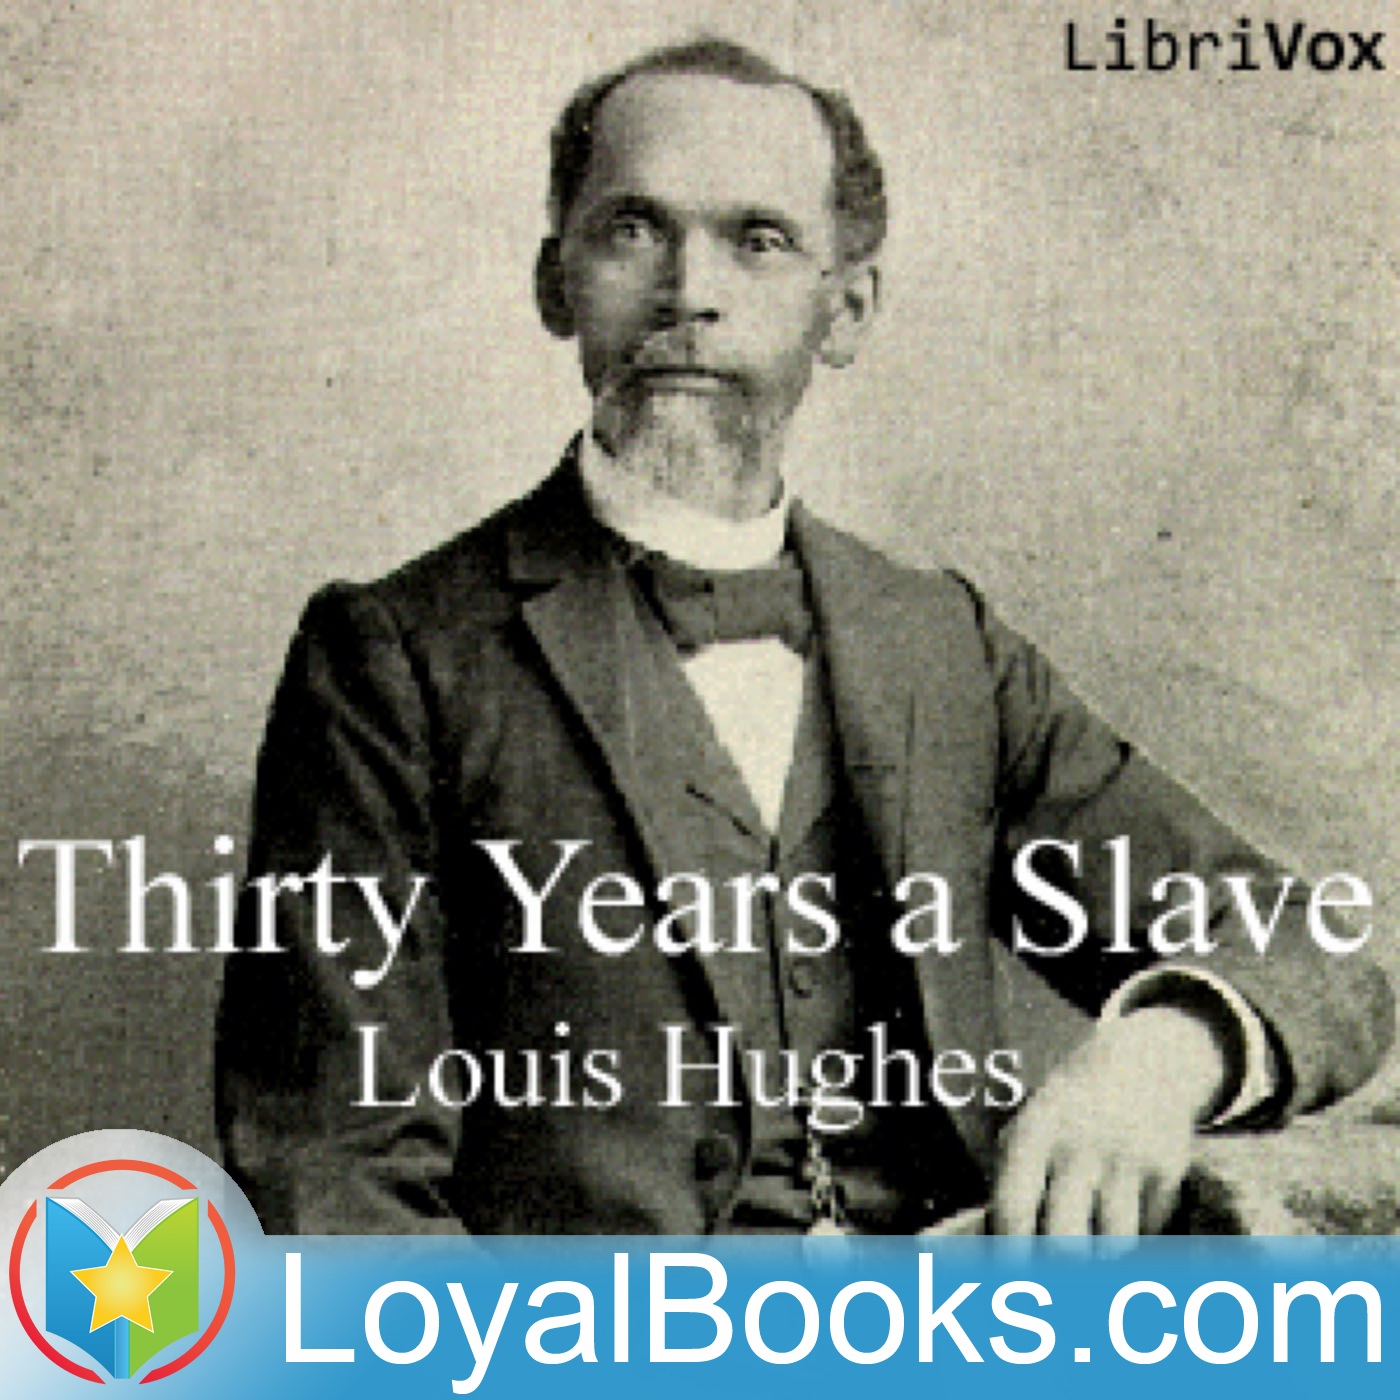 Thirty Years A Slave by Louis Hughes